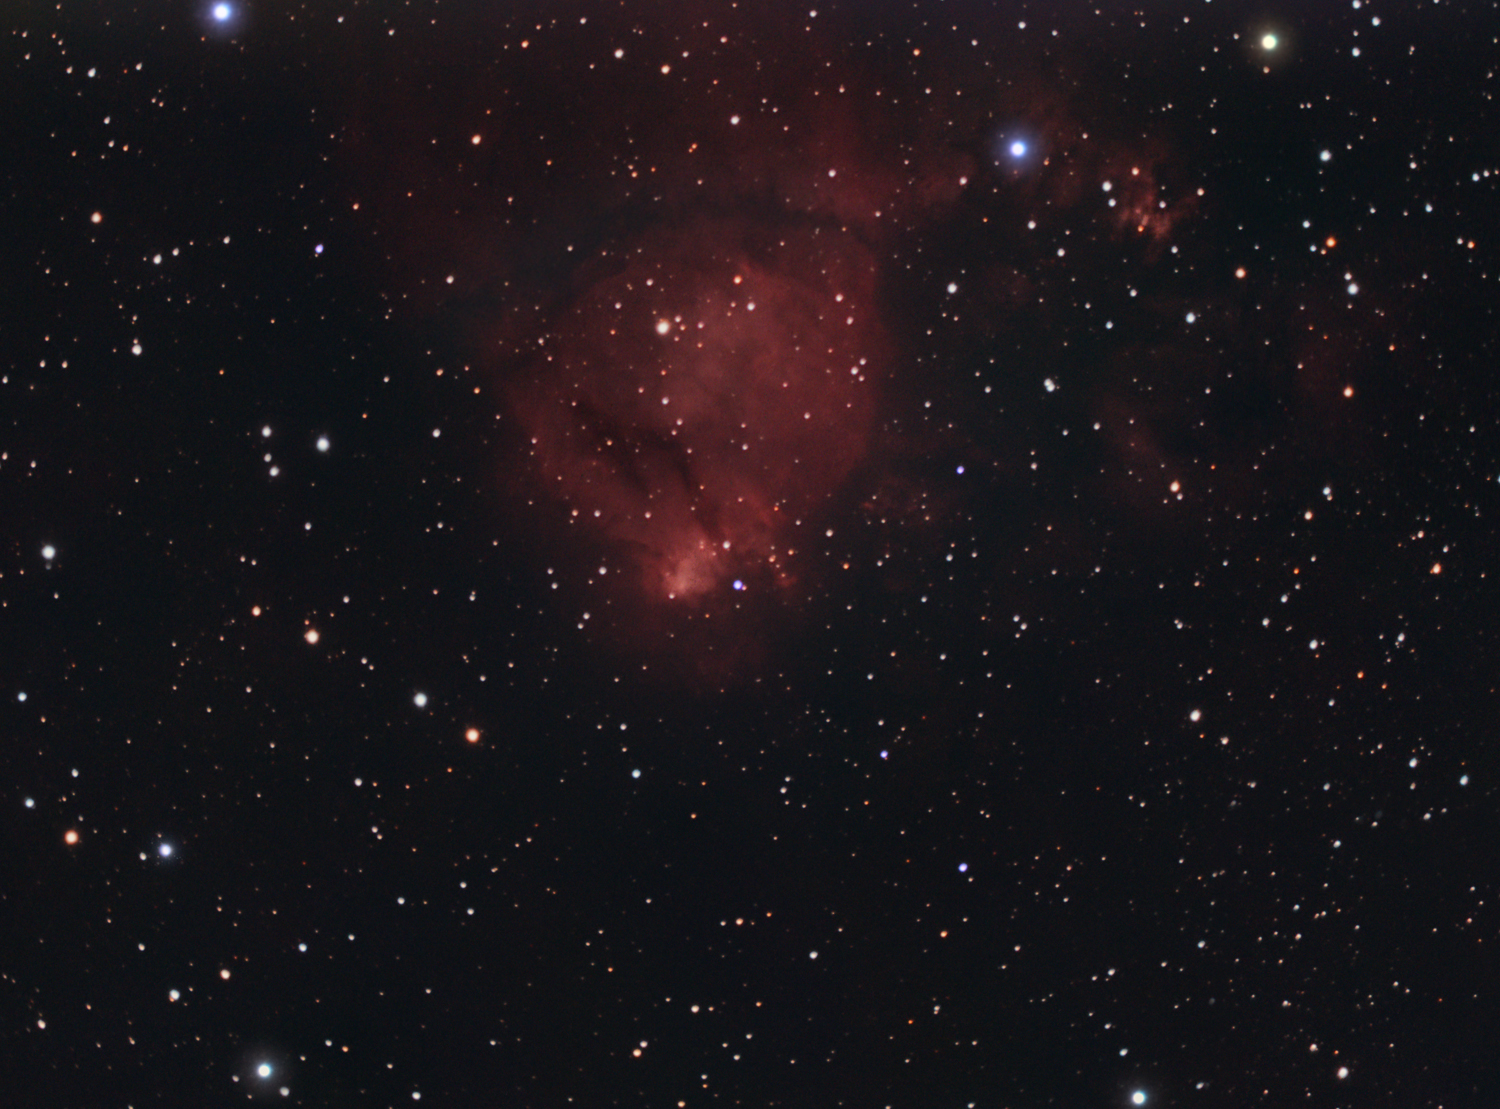 NGC896 in Cassiopeia